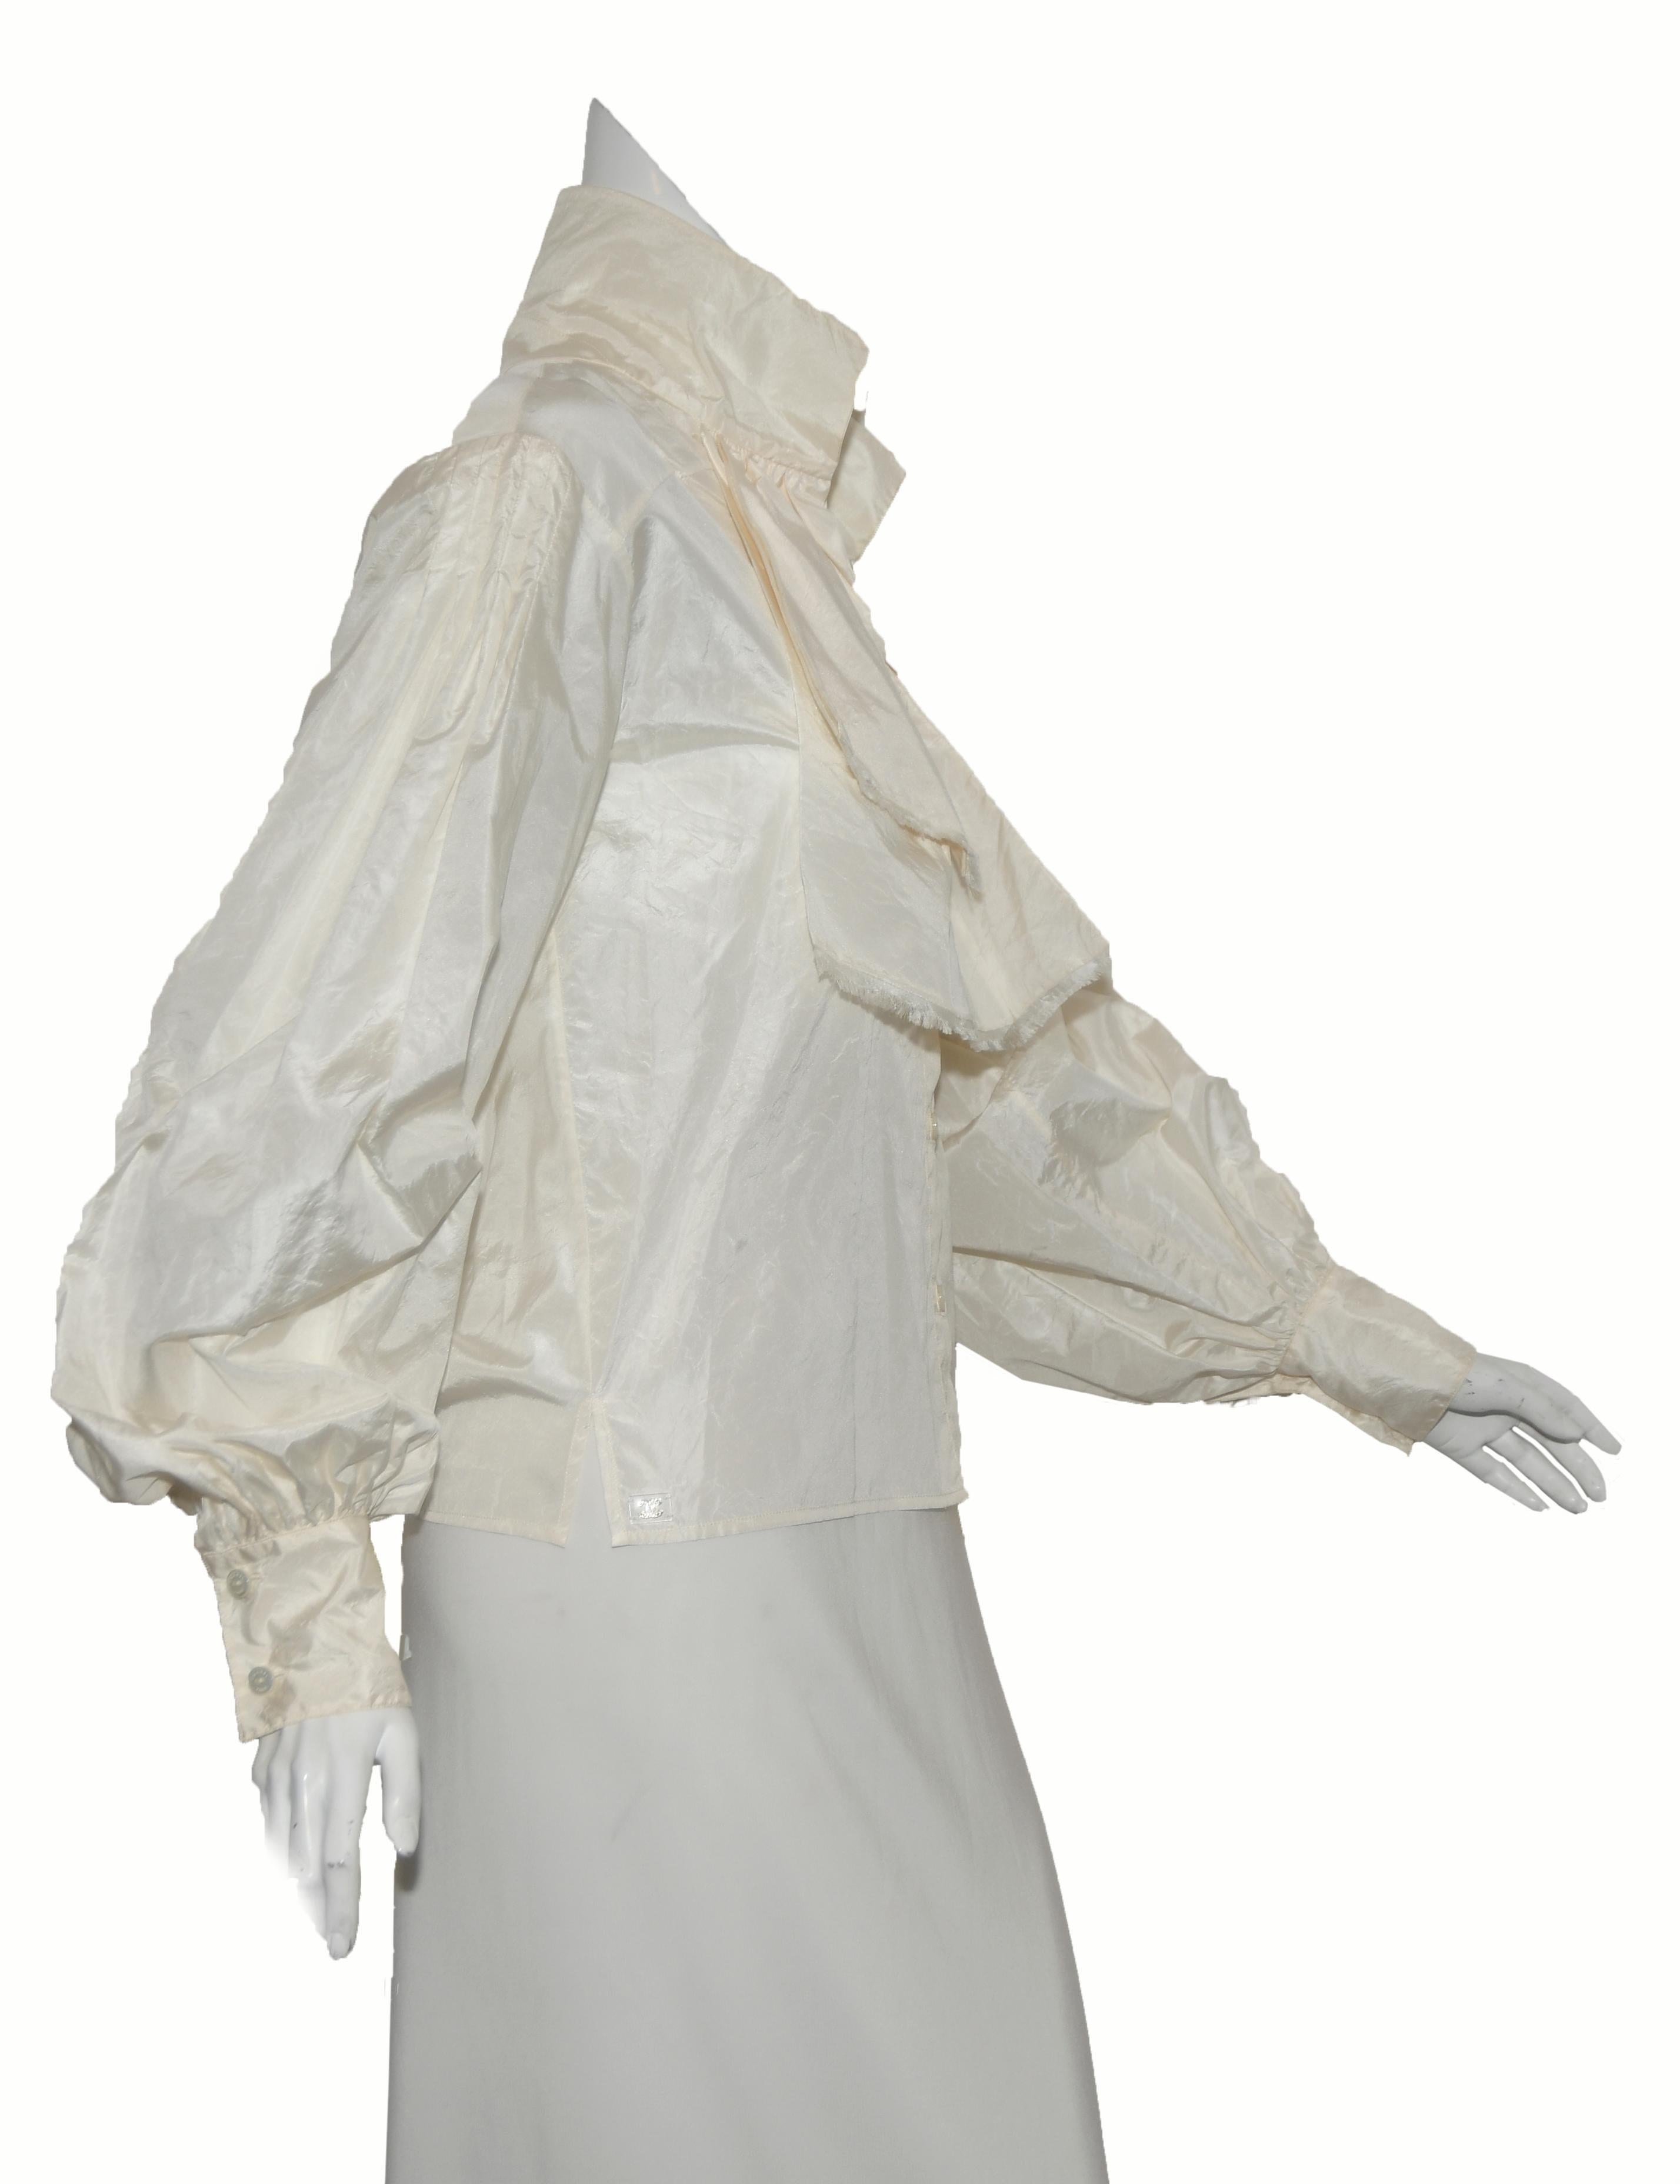 Chanel Ivory silk shantung long sleeve blouse contains two old fashion cravats to be tied at the neck under the shirt collar.  Five ivory colored buttons are used for closure at front and two additional buttons on each cuff.  The long sleeves are